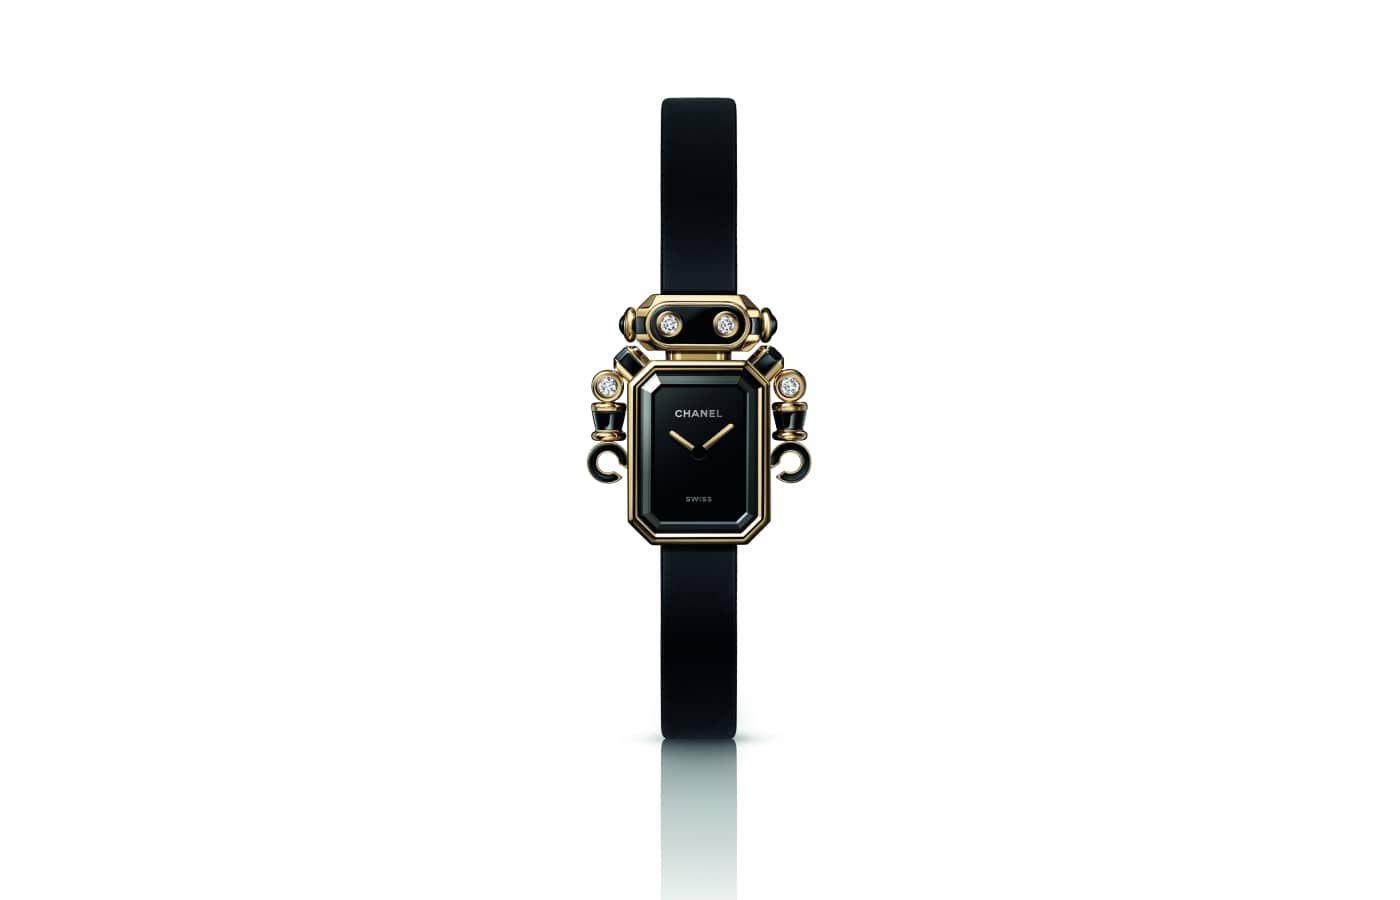 Chanel Robot Premier watch in gold and diamond details 